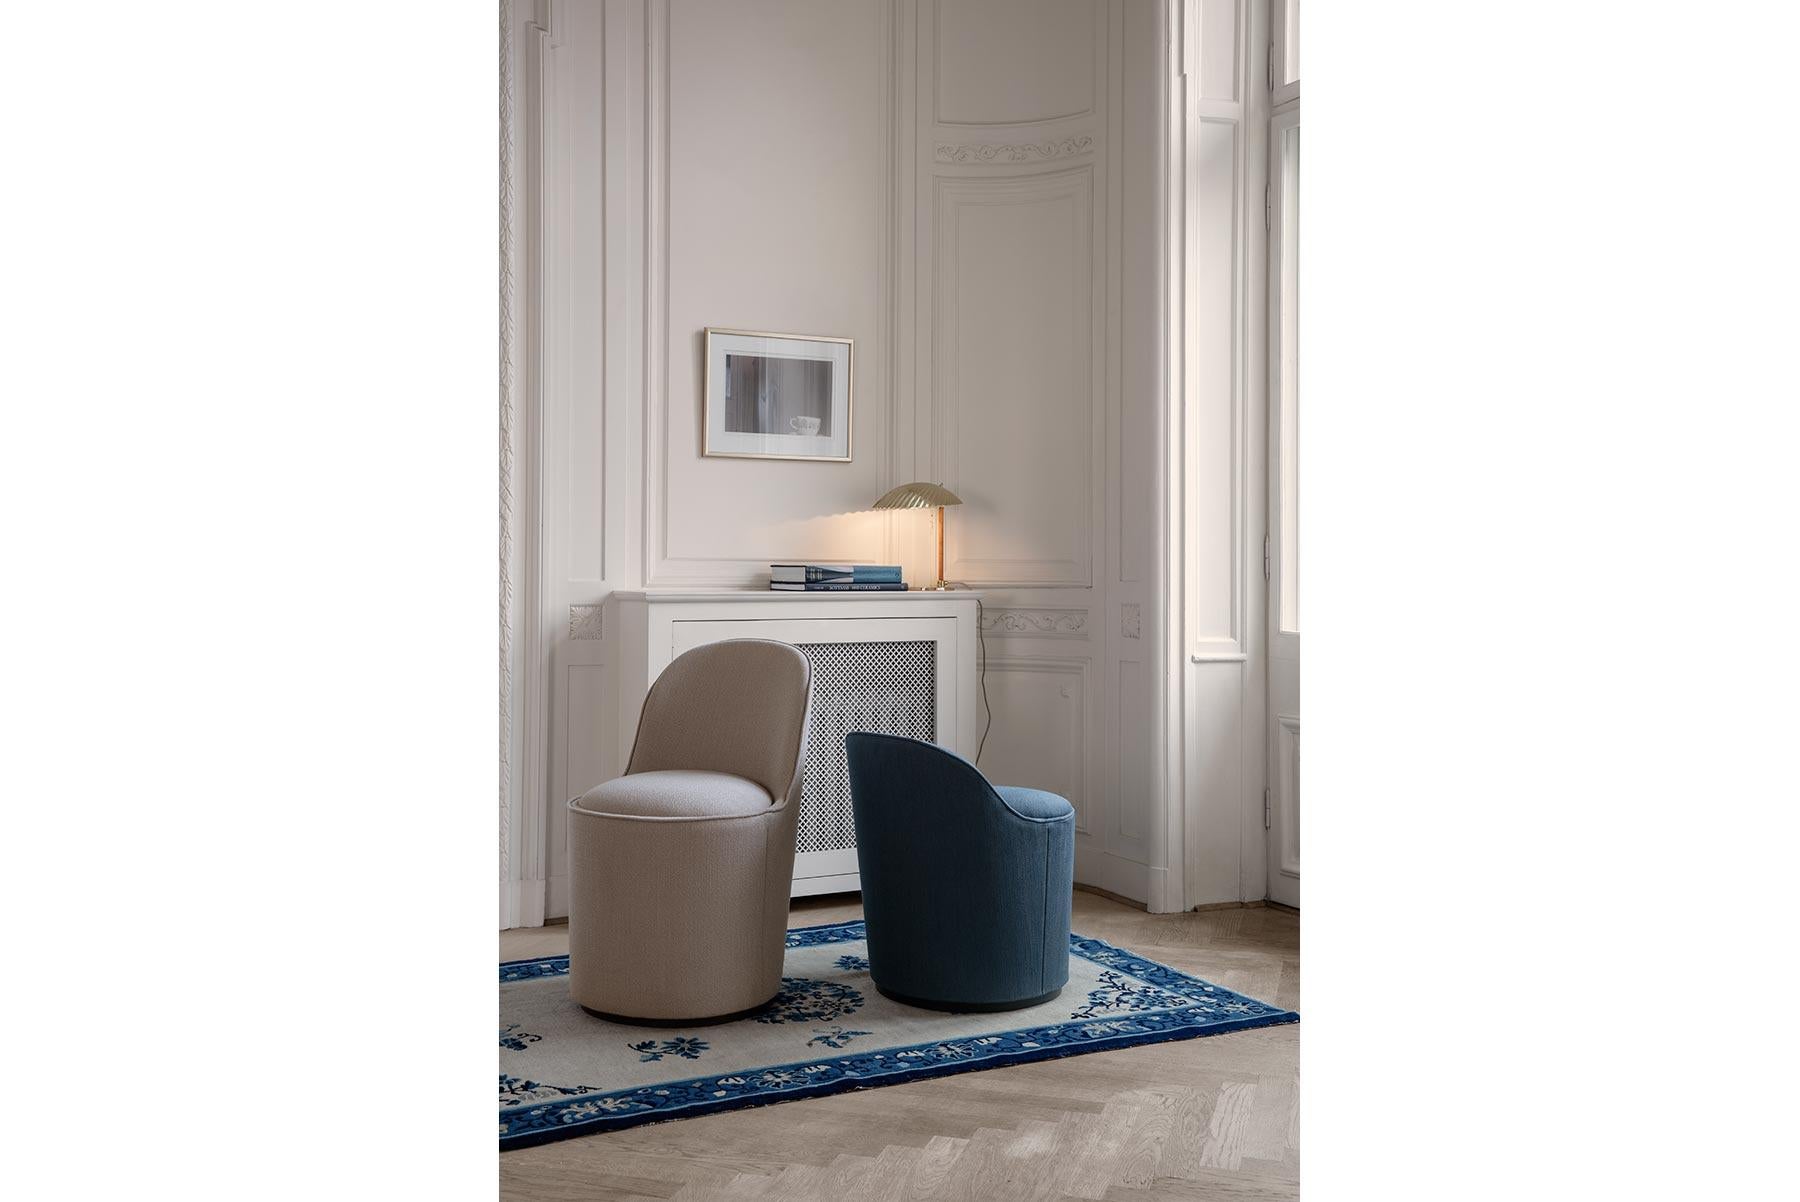 Designed by award-winning duo GamFratesi, the Tail chair holds a playful nature, with its rounded back resembling the spectacular form of a peacock tail. The Tail chair reflects the combination of GamFratesi’s design traditions, where the perfect